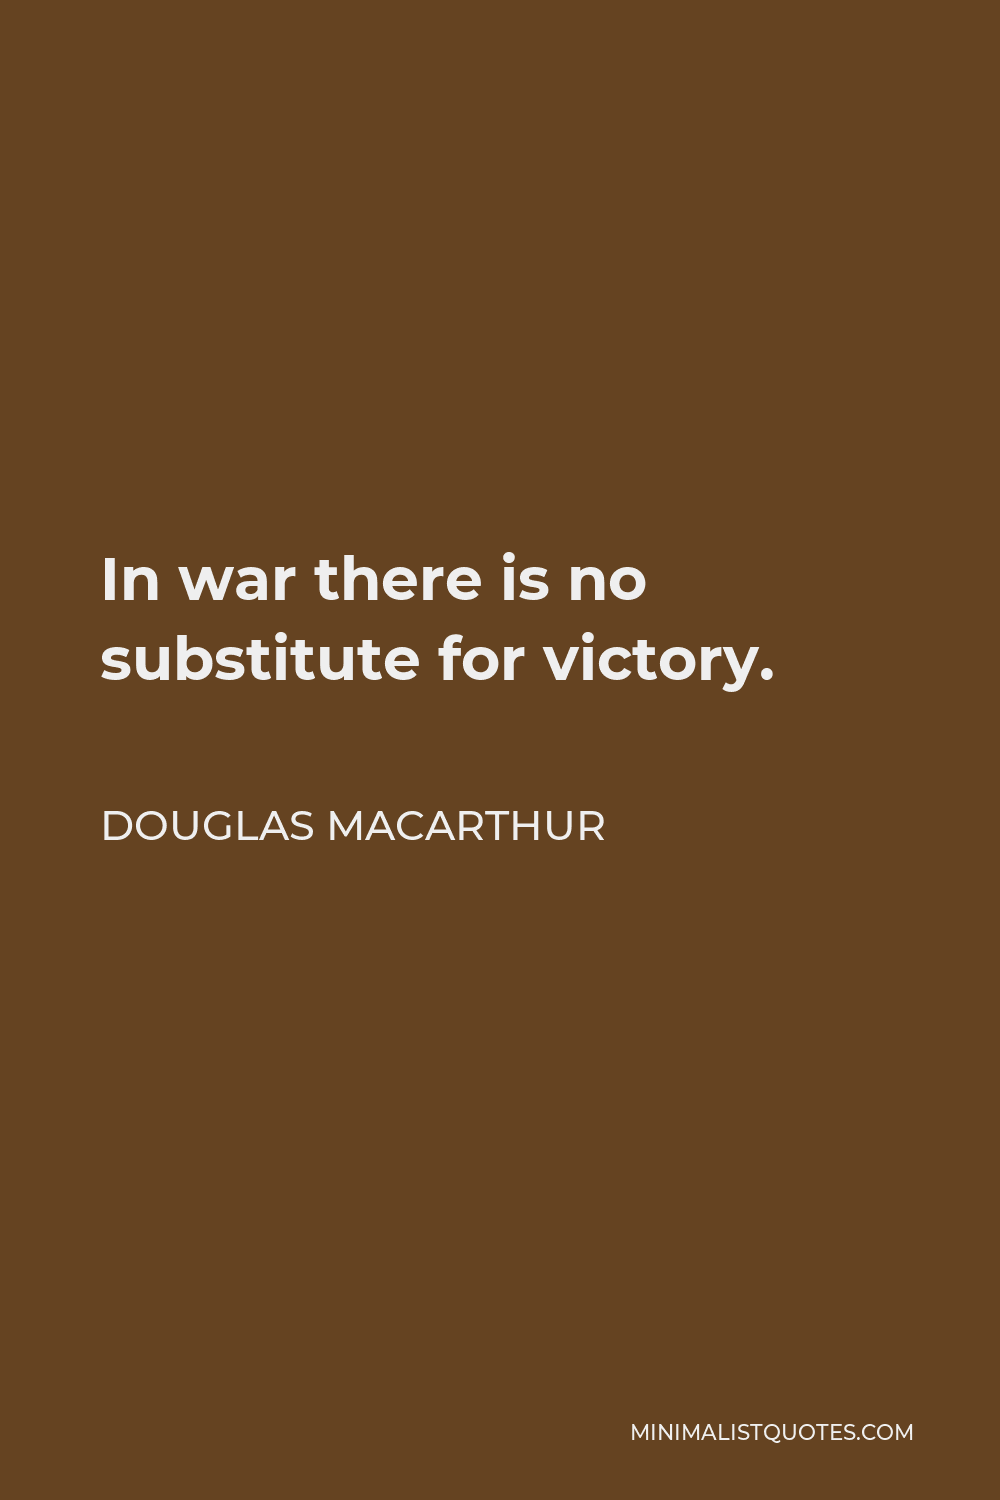 Douglas MacArthur Quote - In war there is no substitute for victory.